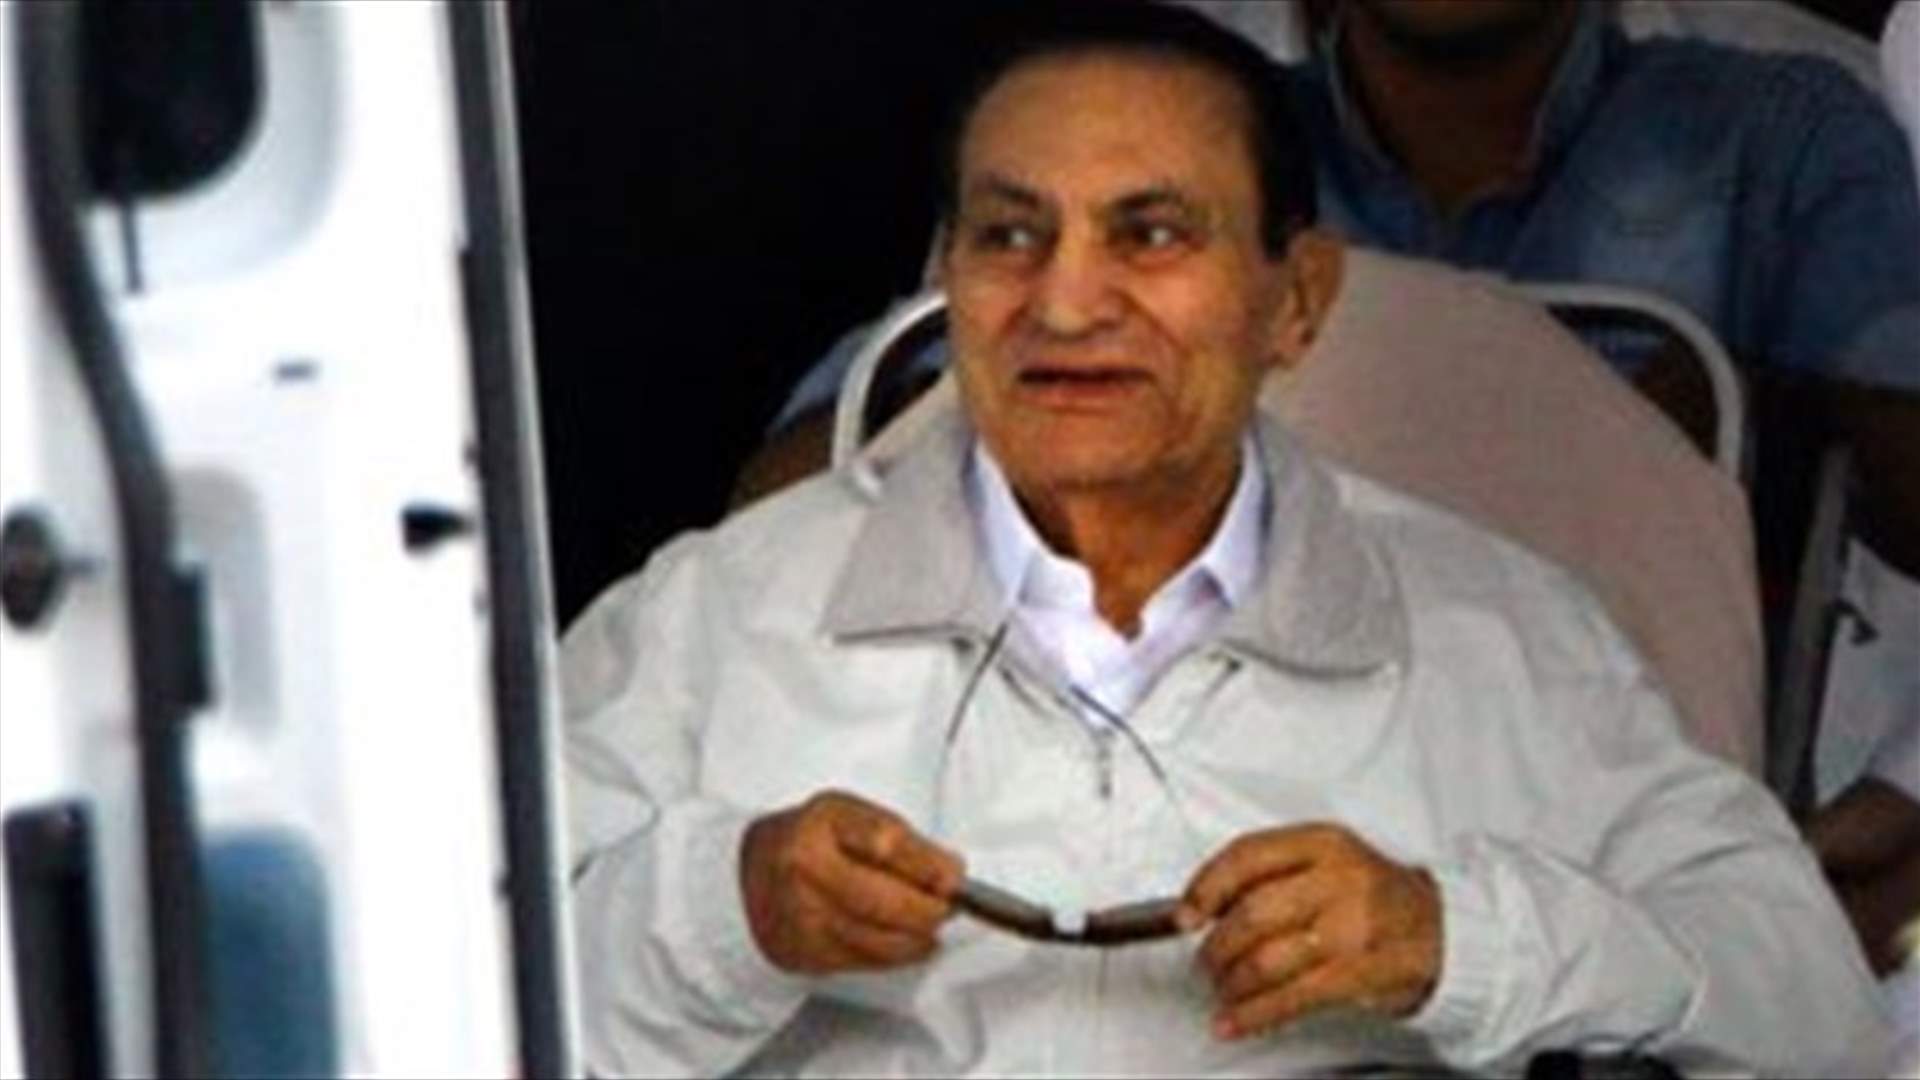 Egypt&#39;s former leader Mubarak freed, six years after overthrow - lawyer